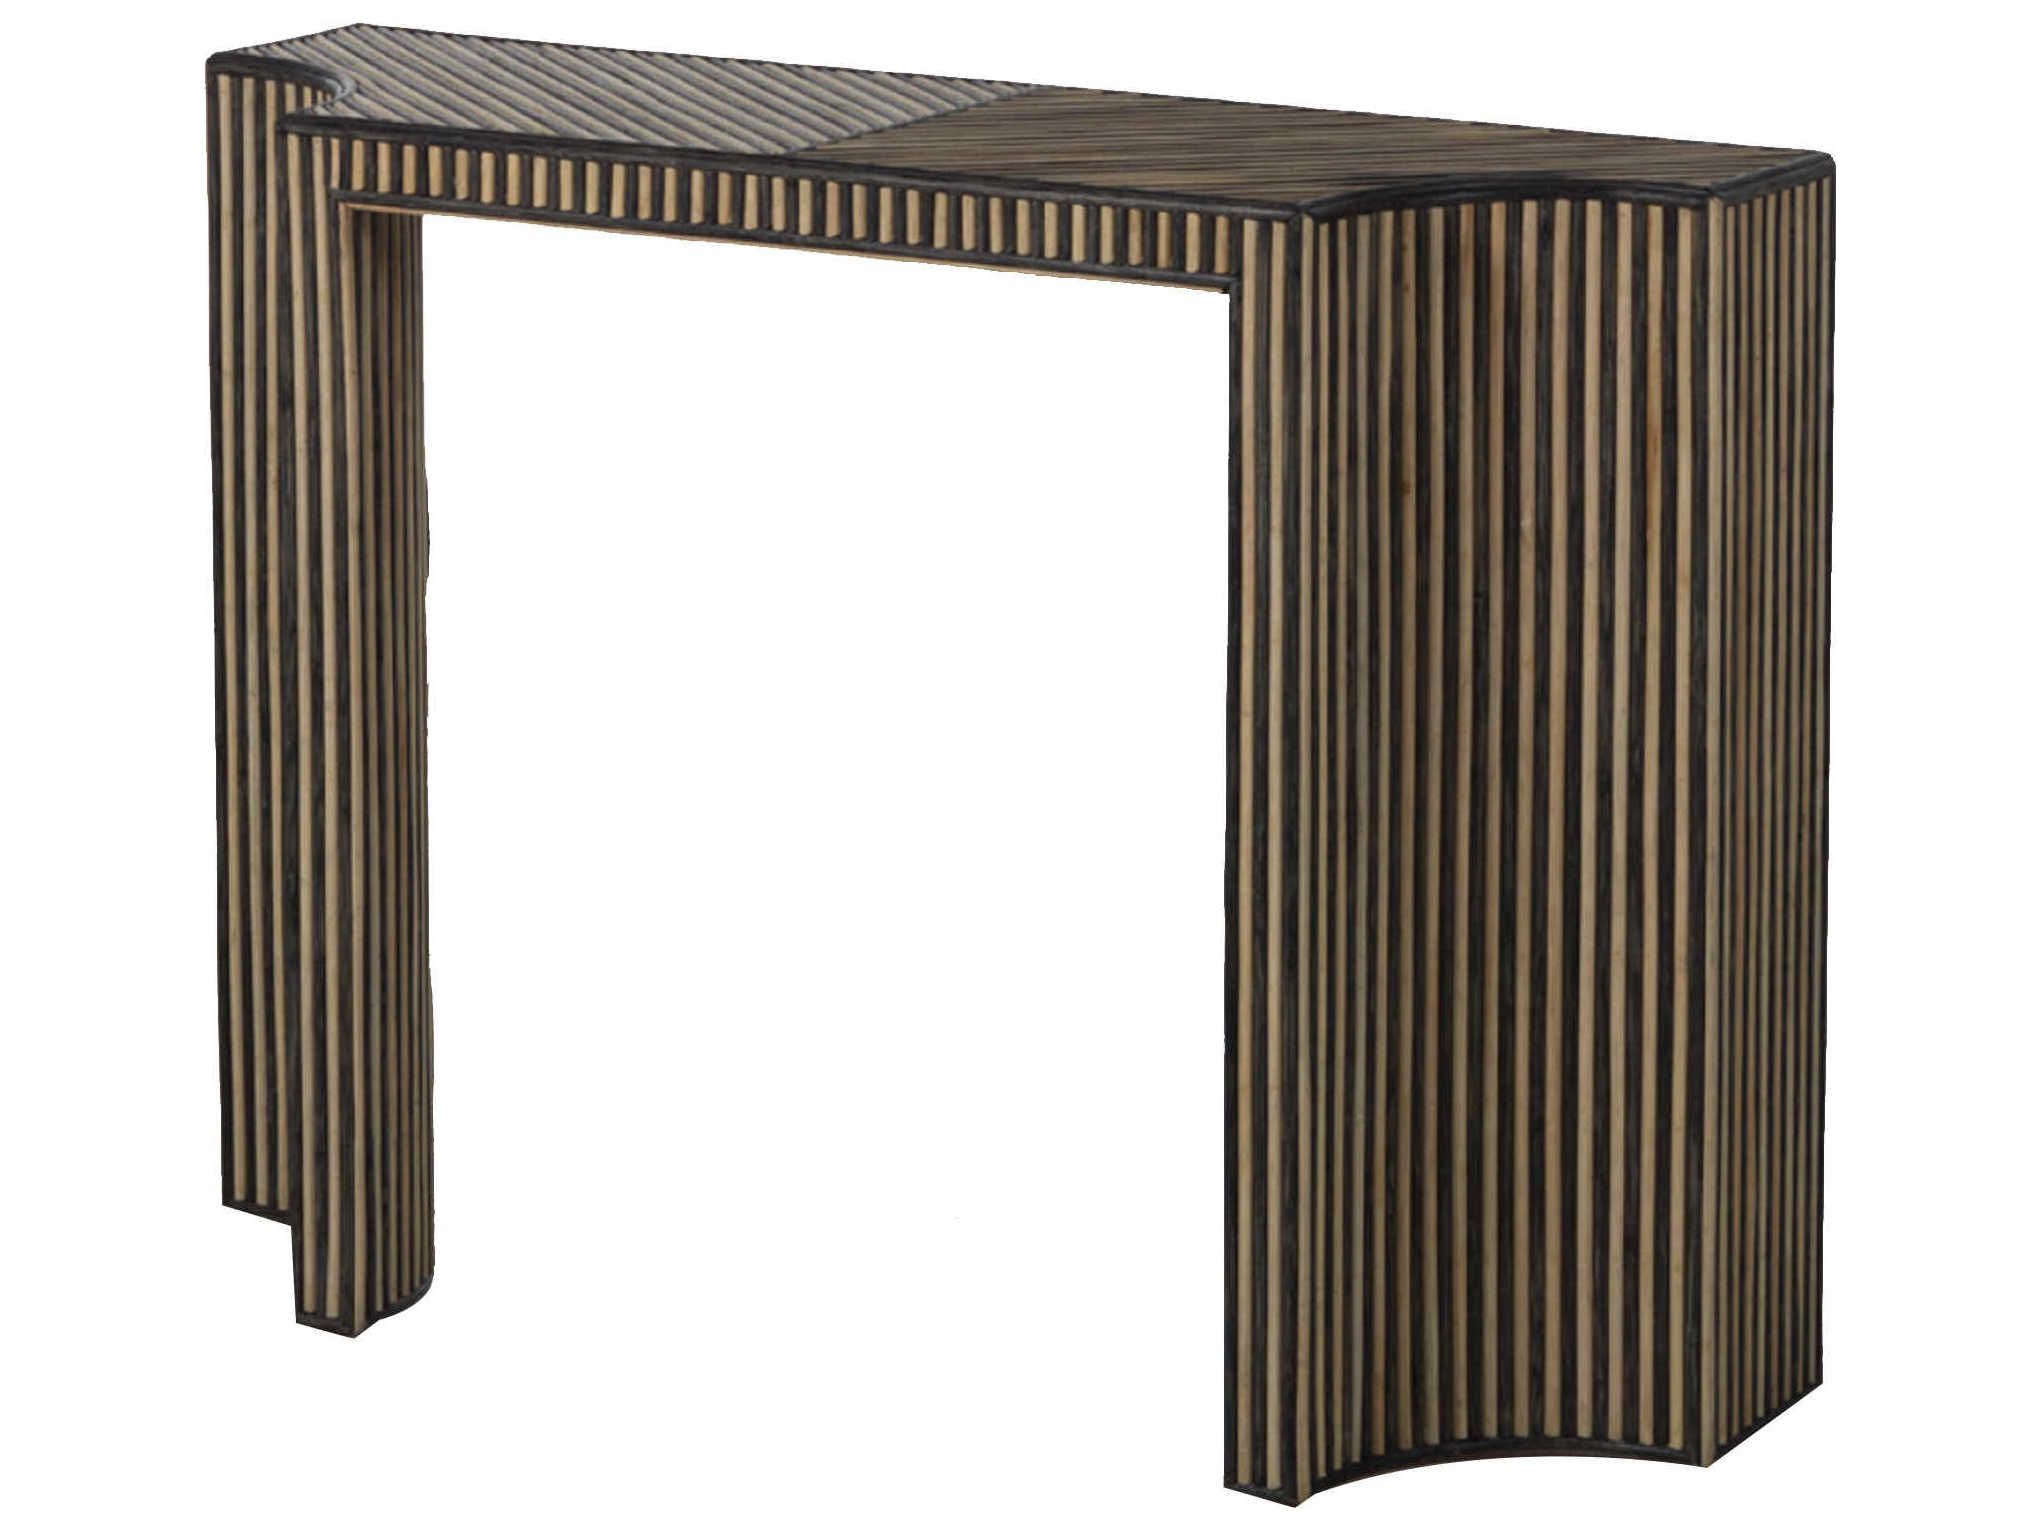 Popular Gabby Home Trent Dark Gray Rattan, Whitewashed Natural Inside Natural Woven Banana Console Tables (View 5 of 10)